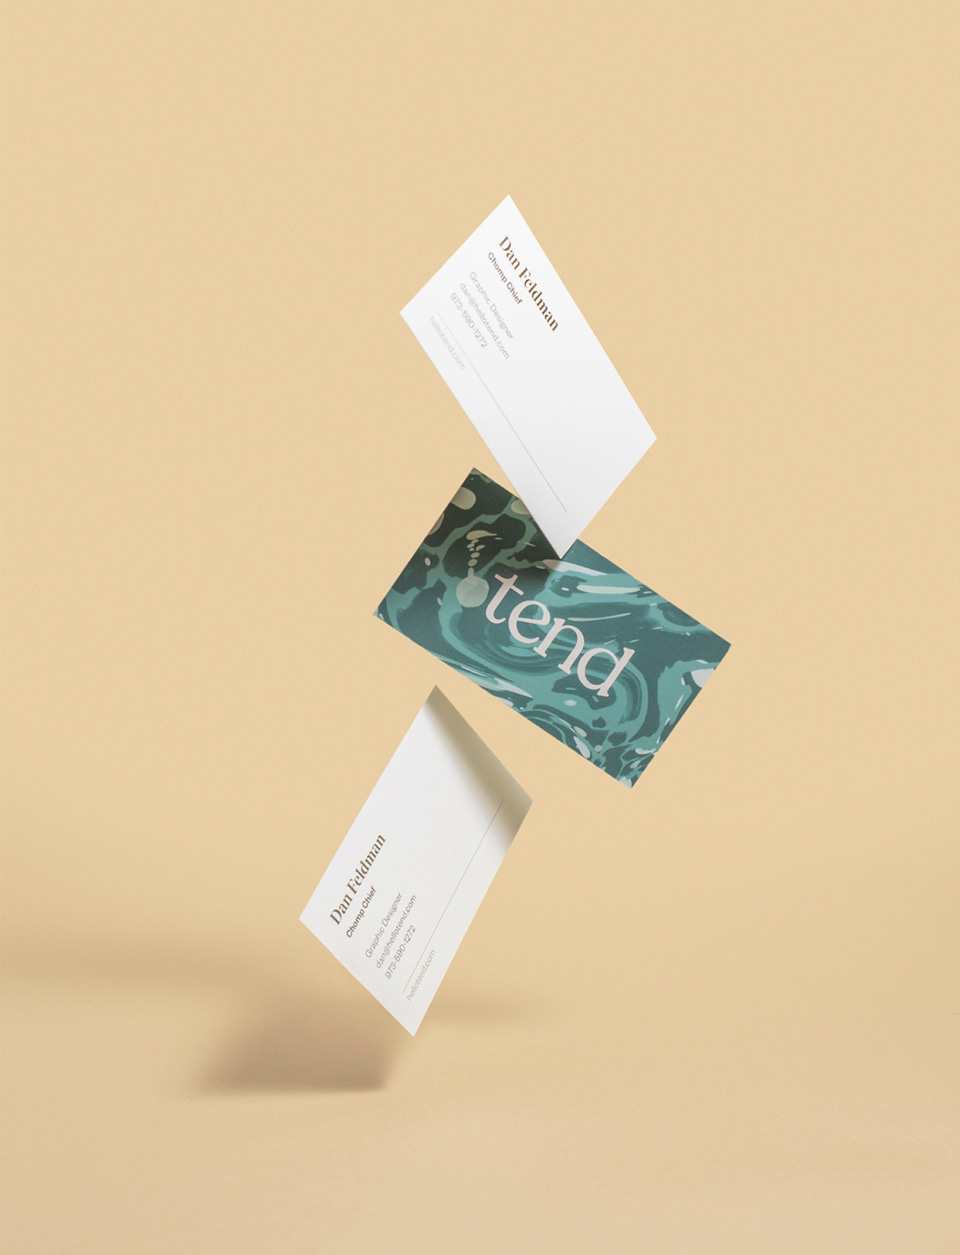 New Logo and Identity for Tend by Mythology